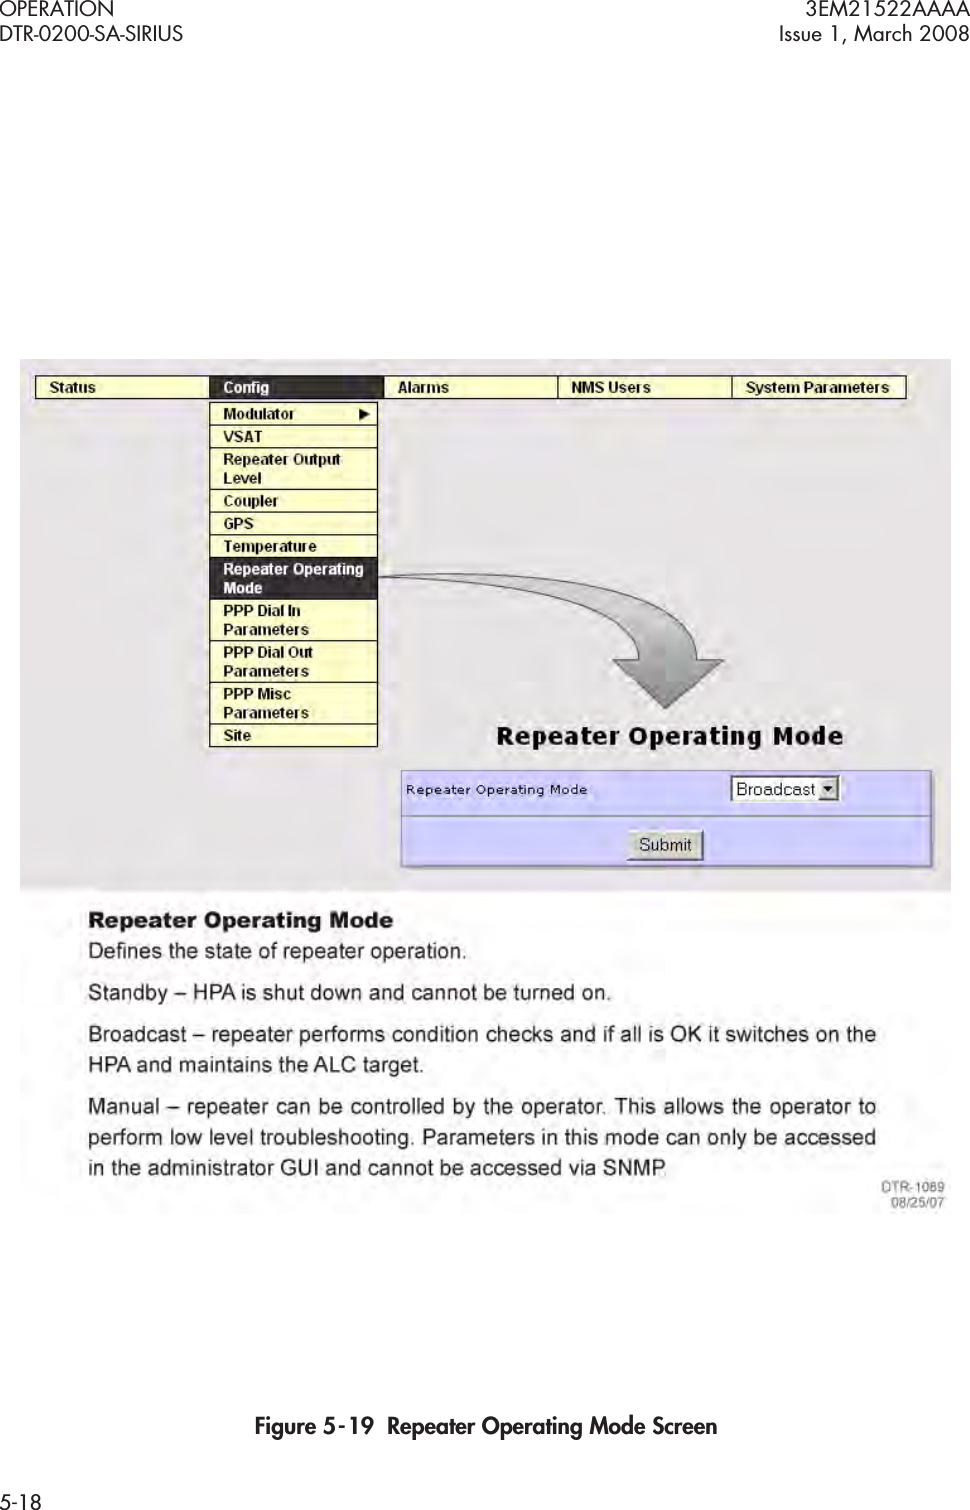 OPERATION 3EM21522AAAADTR-0200-SA-SIRIUS Issue 1, March 20085-18Figure 5  -  19  Repeater Operating Mode Screen